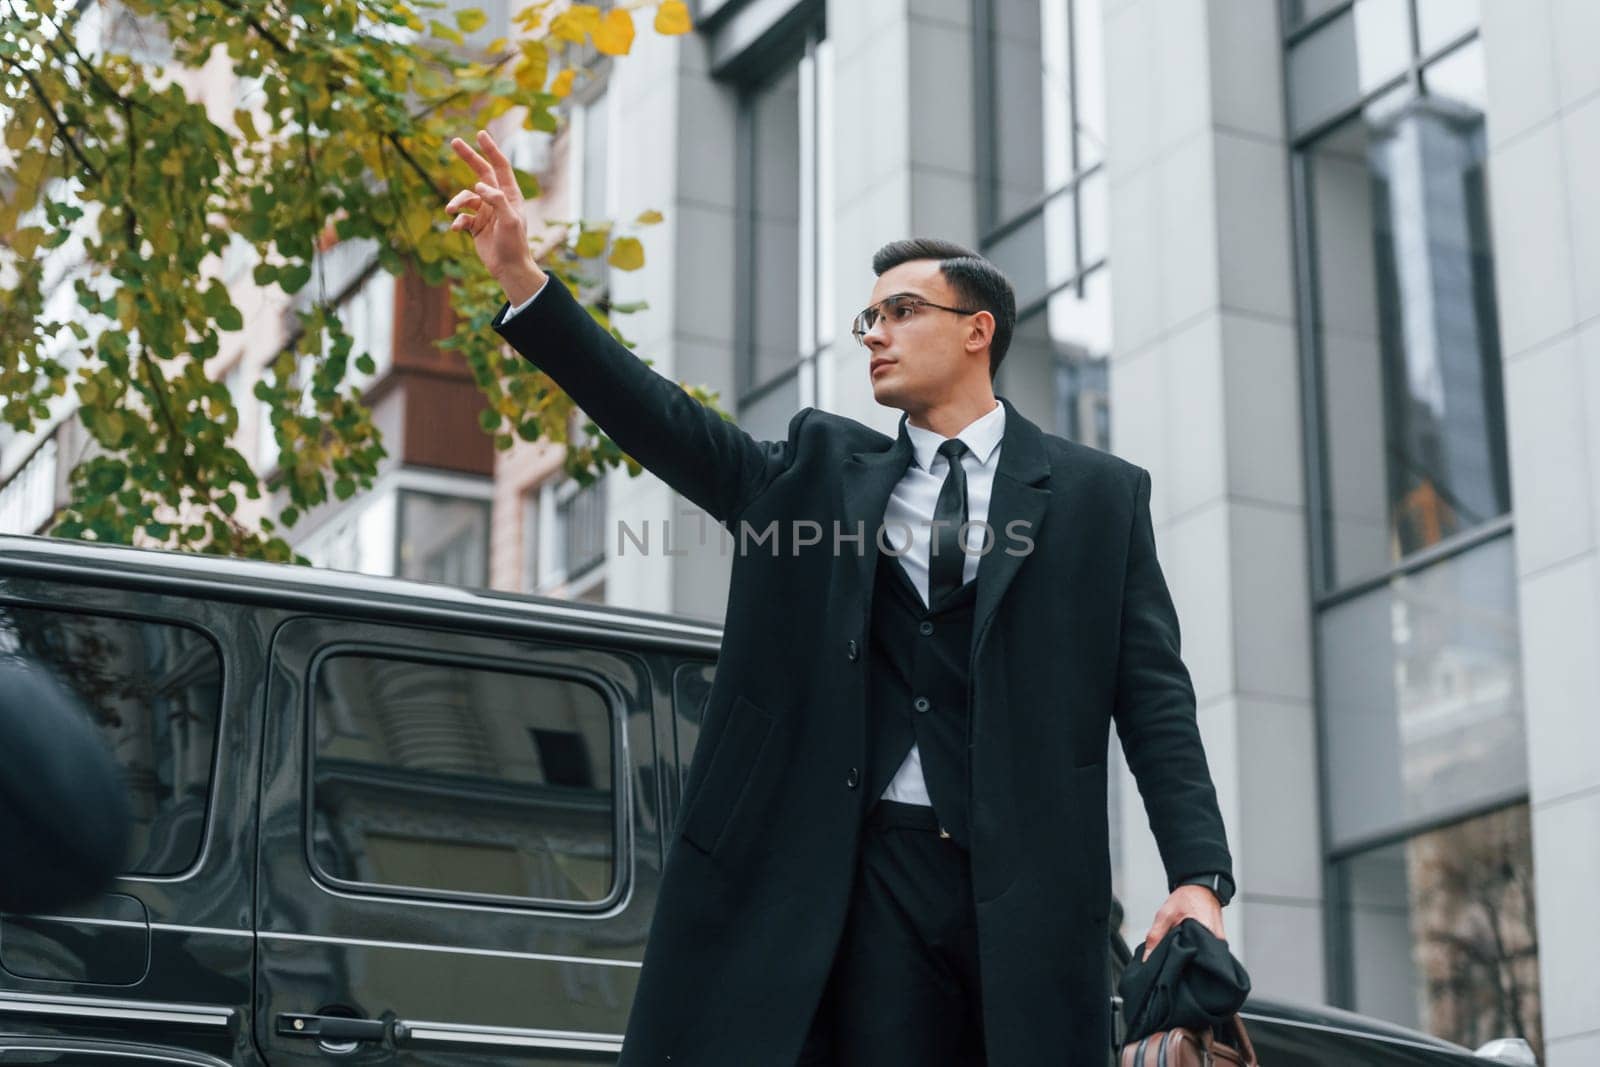 Calling taxi. Businessman in black suit and tie is outdoors in the city.